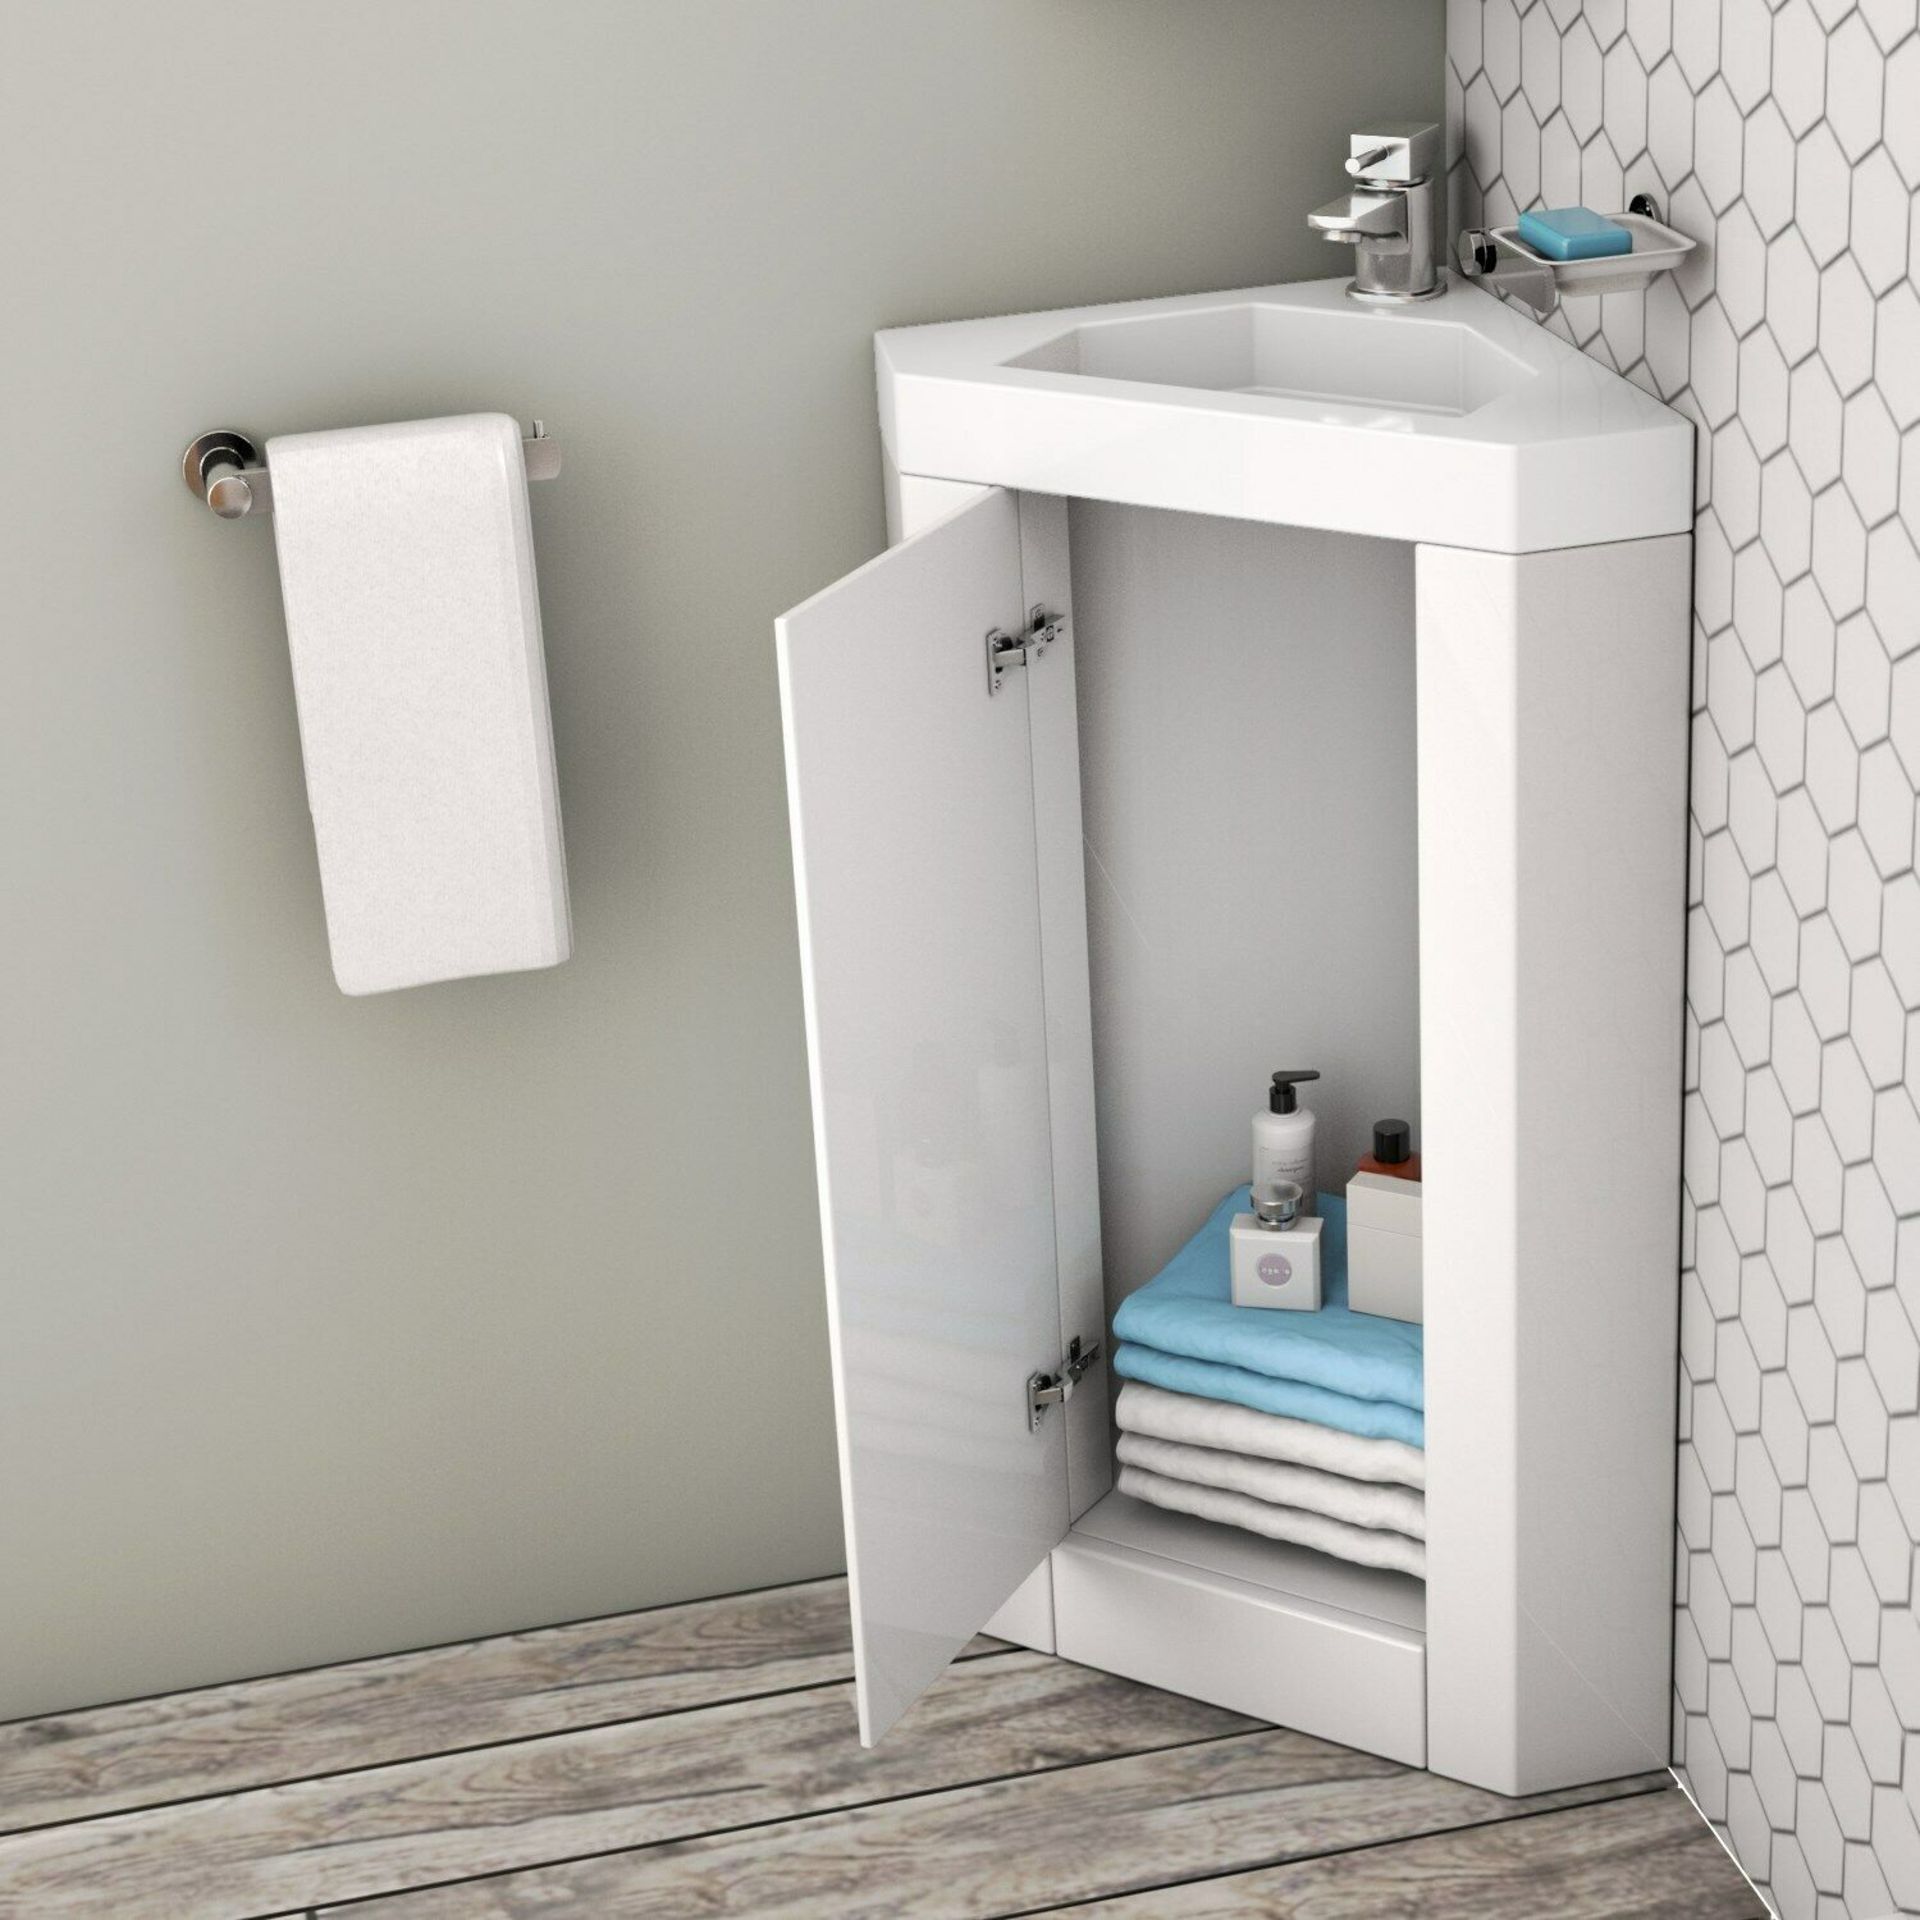 New & Boxed 400mm White Freestanding Vanity Unit With Basin - Apollo. RRP £394.99.Mv836V2.Cle... - Image 3 of 3